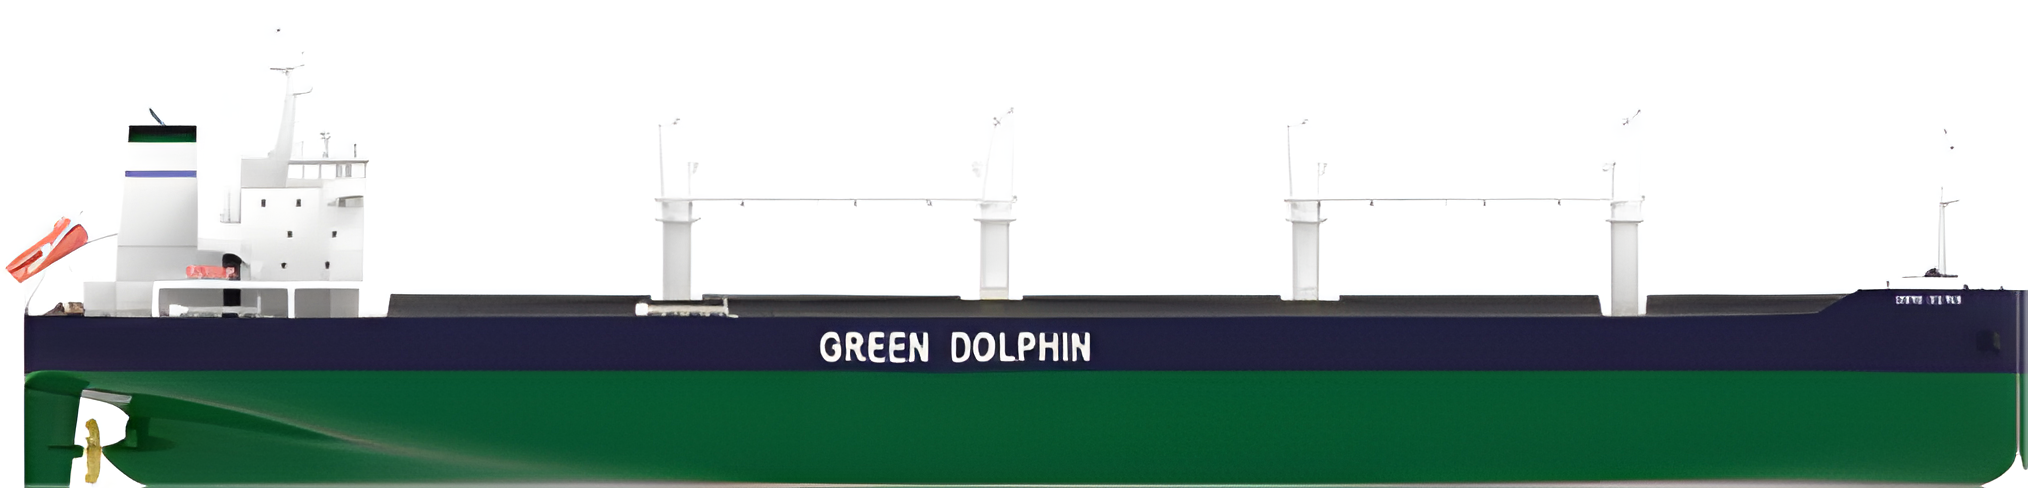 Green Dolphin side